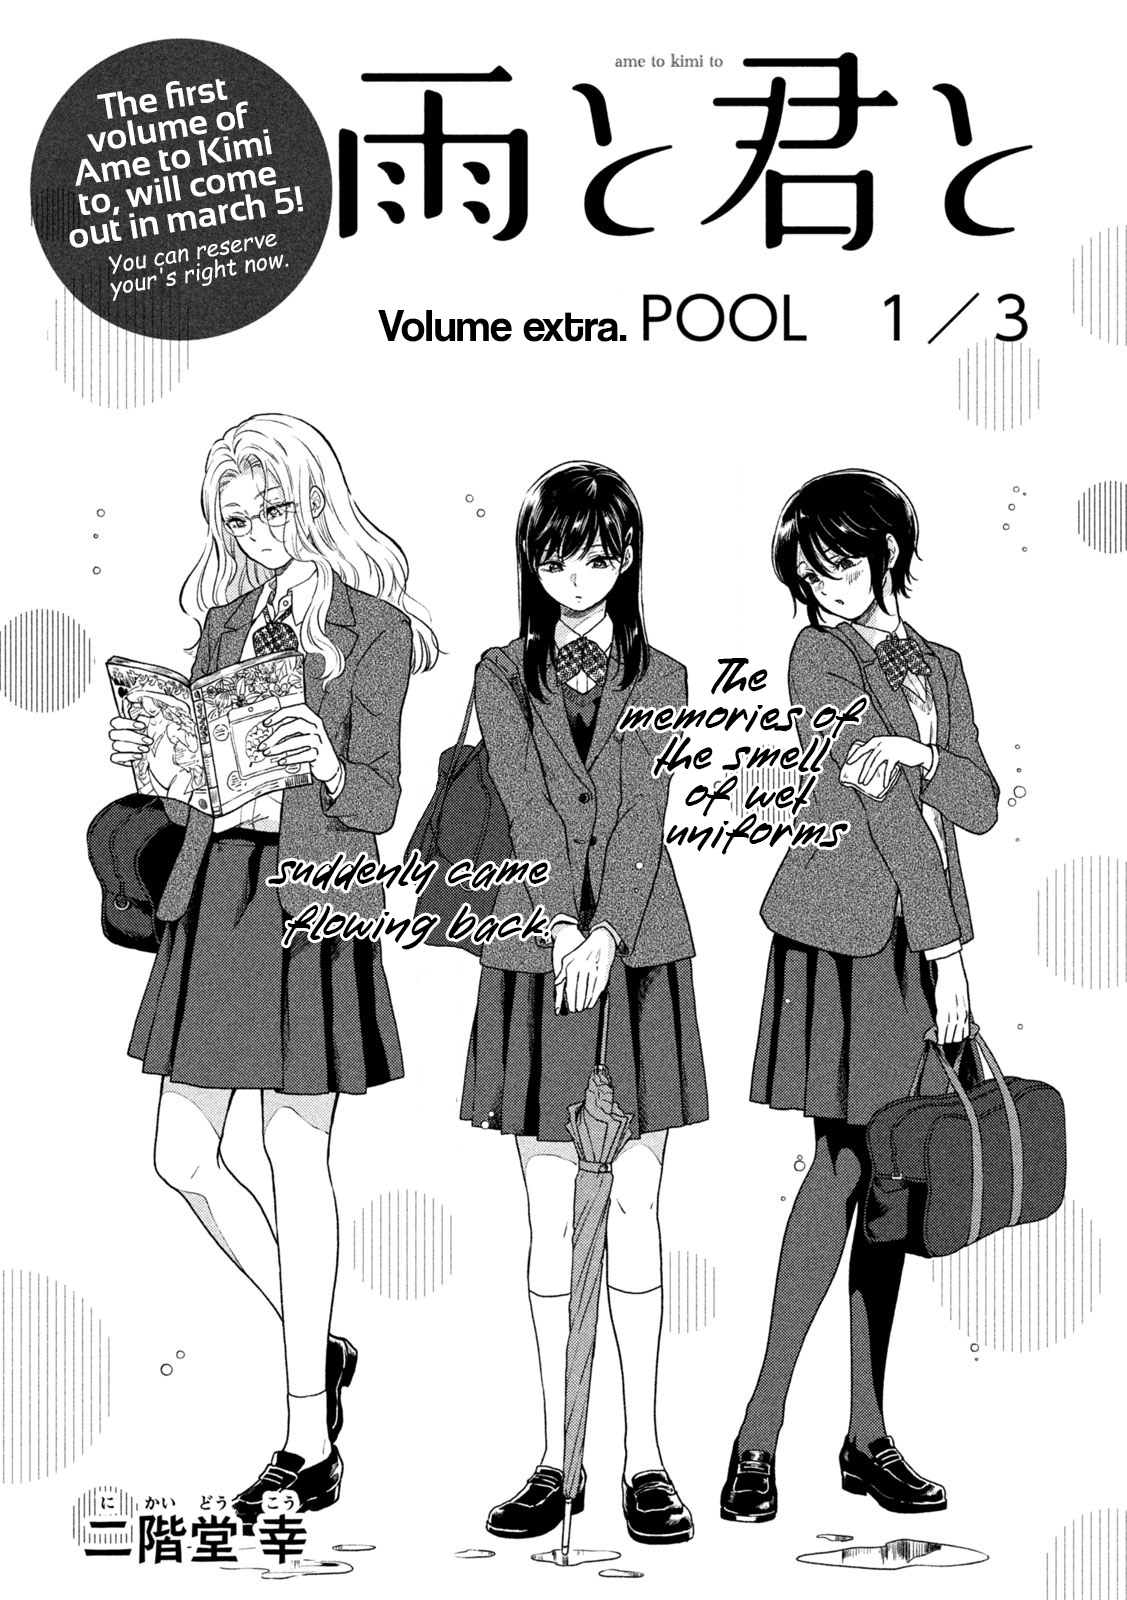 Ame to Kimi to Vol. 1 Ch. 24.1 Volume extra. POOL 1/3